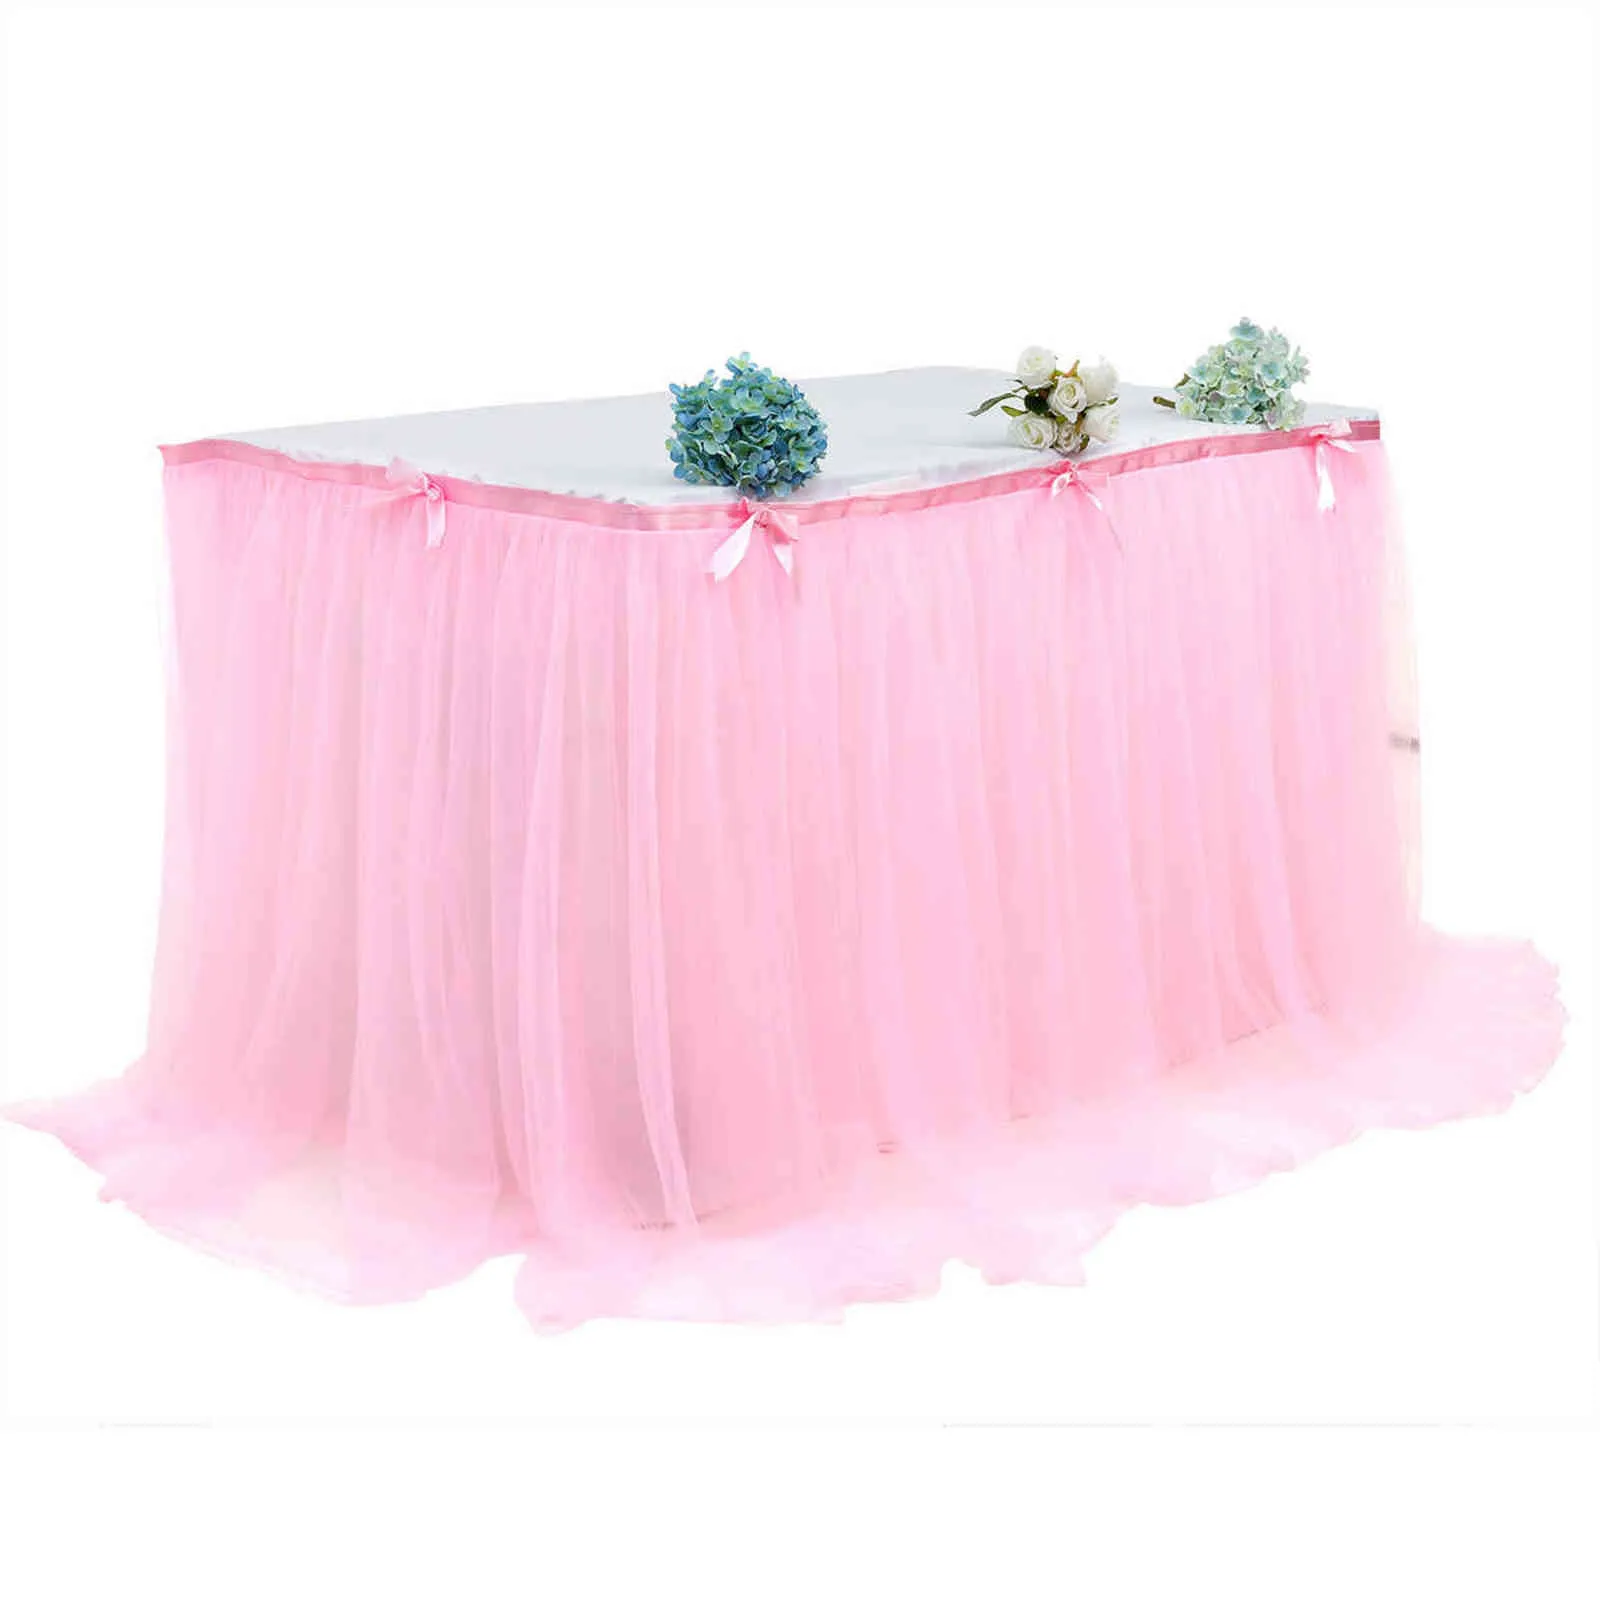 White Table Skirt Tutu Tulle Tableware Cloth Baby Shower Birthday Halloween Banquet Wedding Party Red Skirting Cover Home Decor 21277C